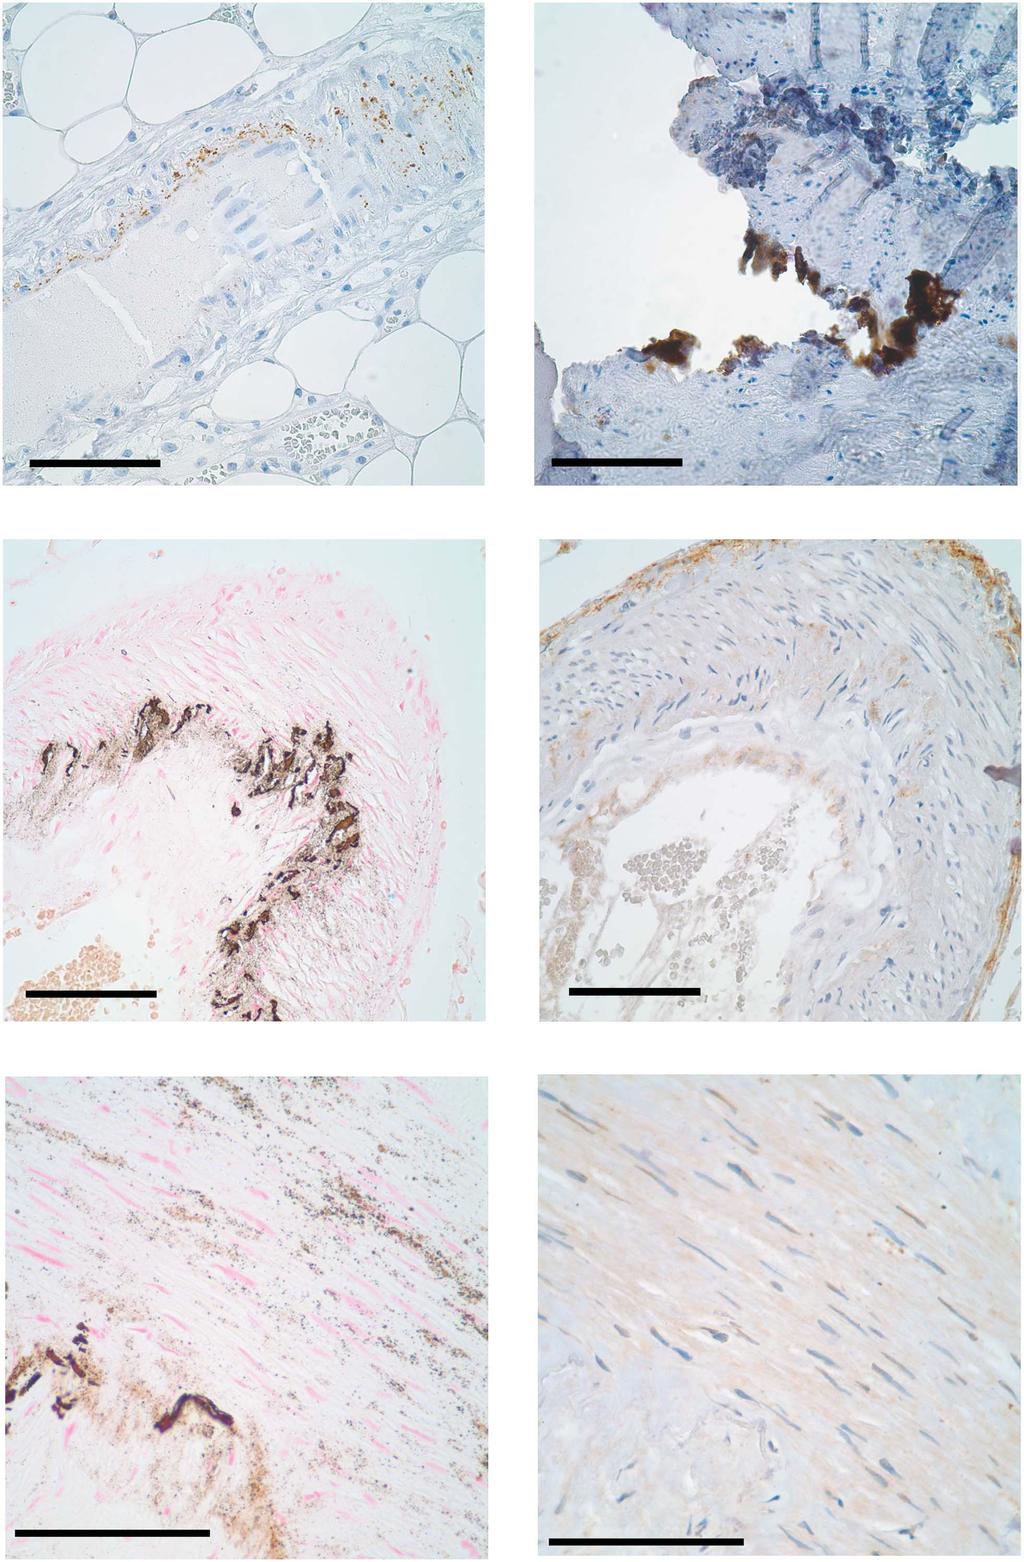 Figure 6 Positive controls for immunohistochemical analysis. (a) Sample of bone showing cellular staining of the osteocytes for osteocalcin. (b) Runx2 staining of placenta.